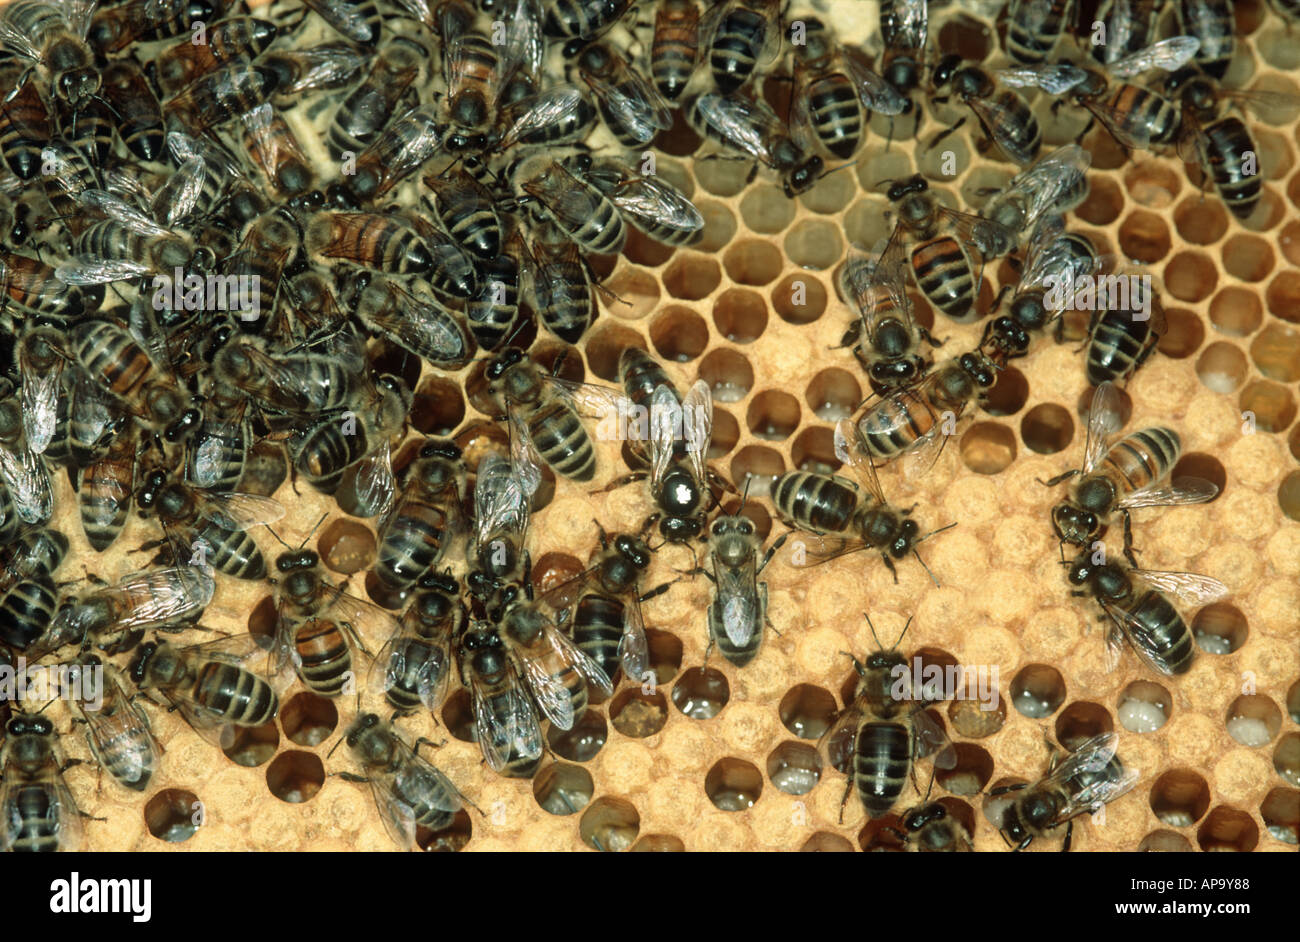 Queen bee with white mark and workers on brood cells from the bee hive Stock Photo